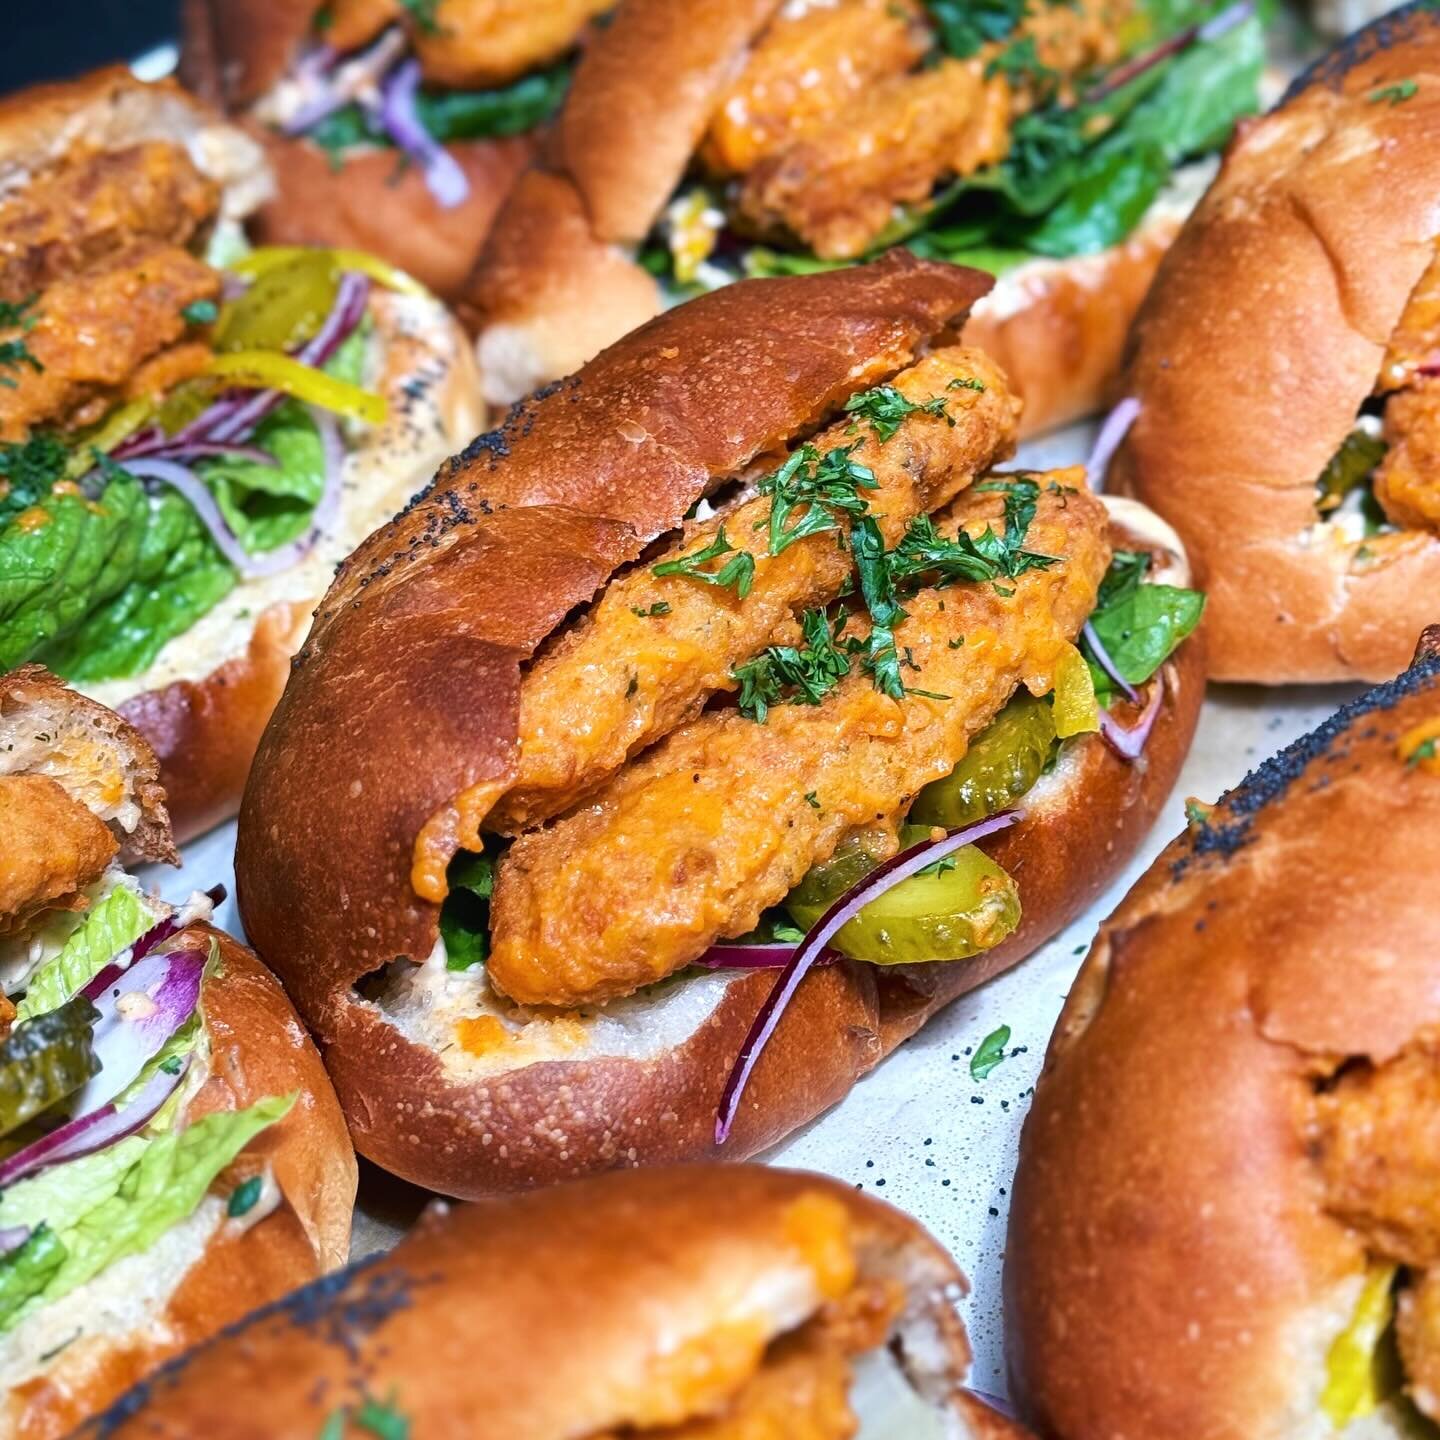 Brioche bun, house-made ranch, gherkins, red onion, lettuce &amp; the nicest plant- based chicken schnitzel coated in buffalo sauce 🔥🤤
Have you tried our Buffalo Chickn Sammie yet? 💘 Available throughout Autumn&rsquo;s menu!